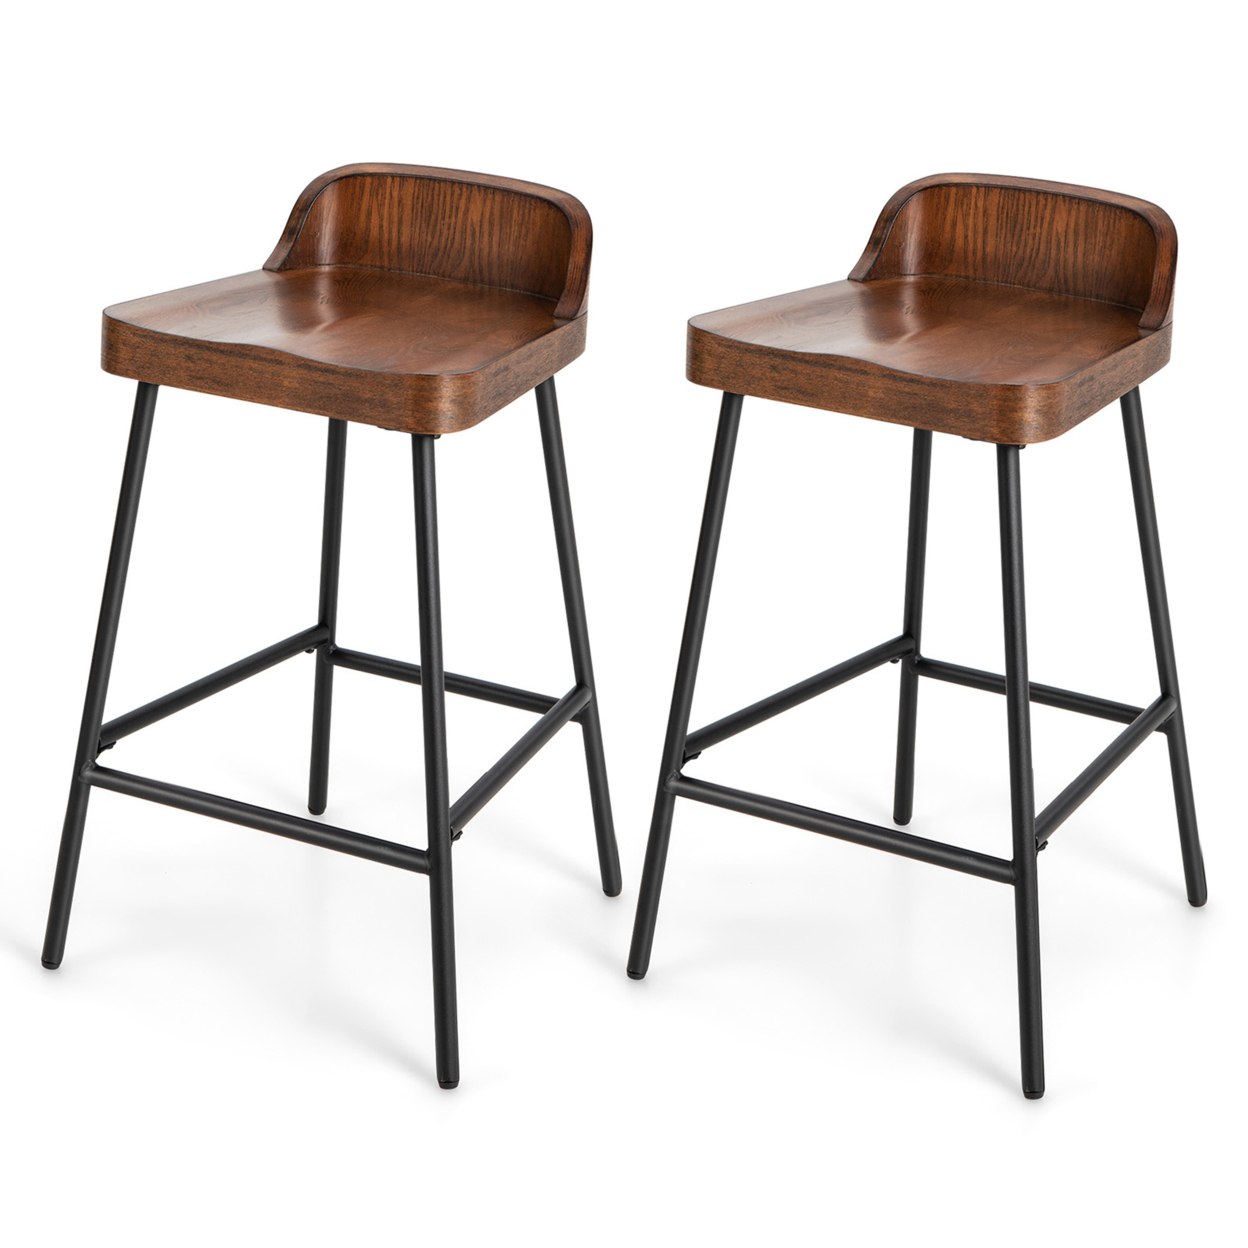 2PCS 24.5'' Low-Back Bar Stool Industrial Counter Height Chair Stool